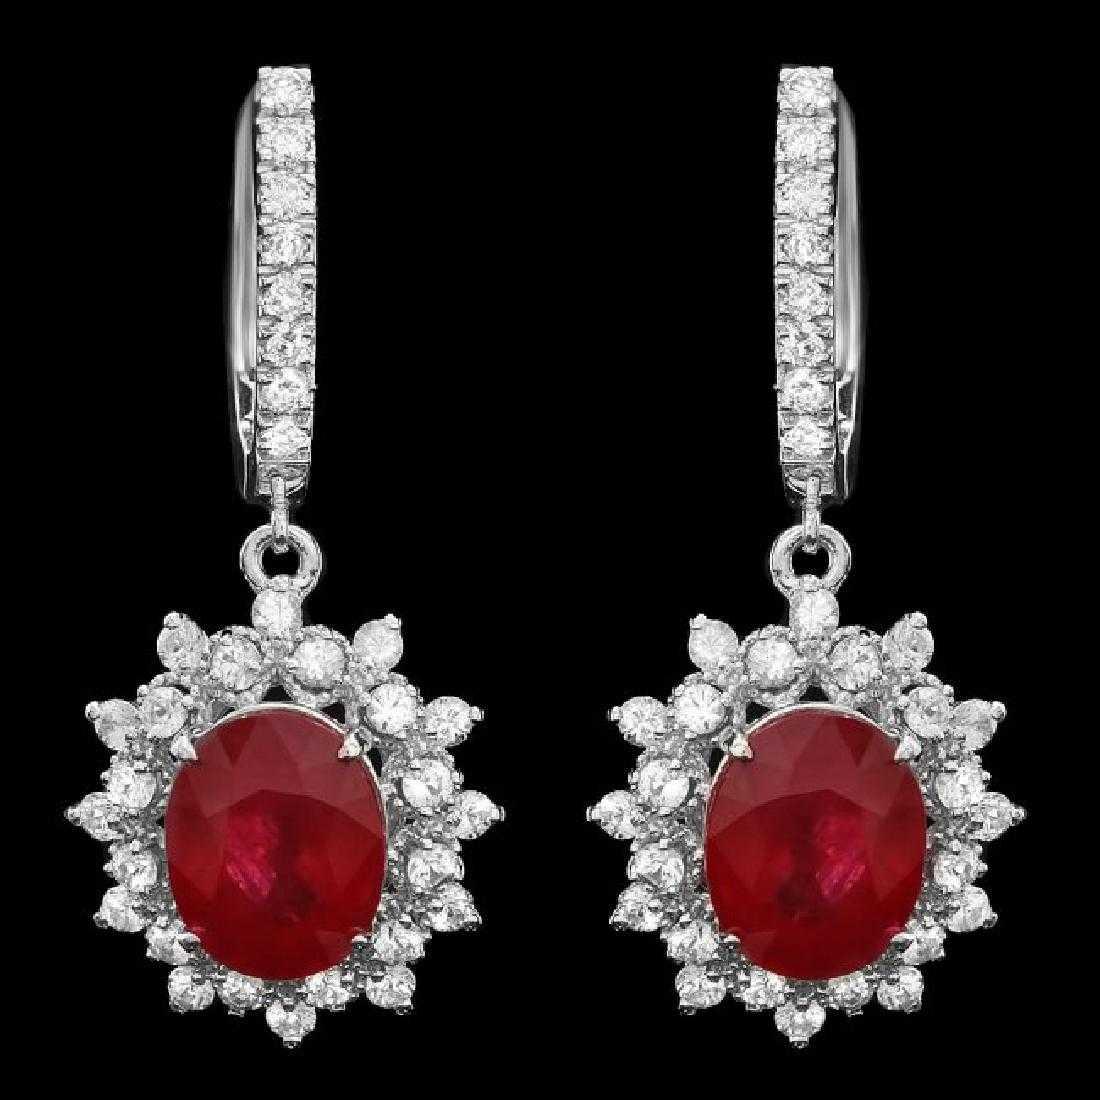 14K White Gold 7.85ct Ruby and 1.92ct Diamond Earrings